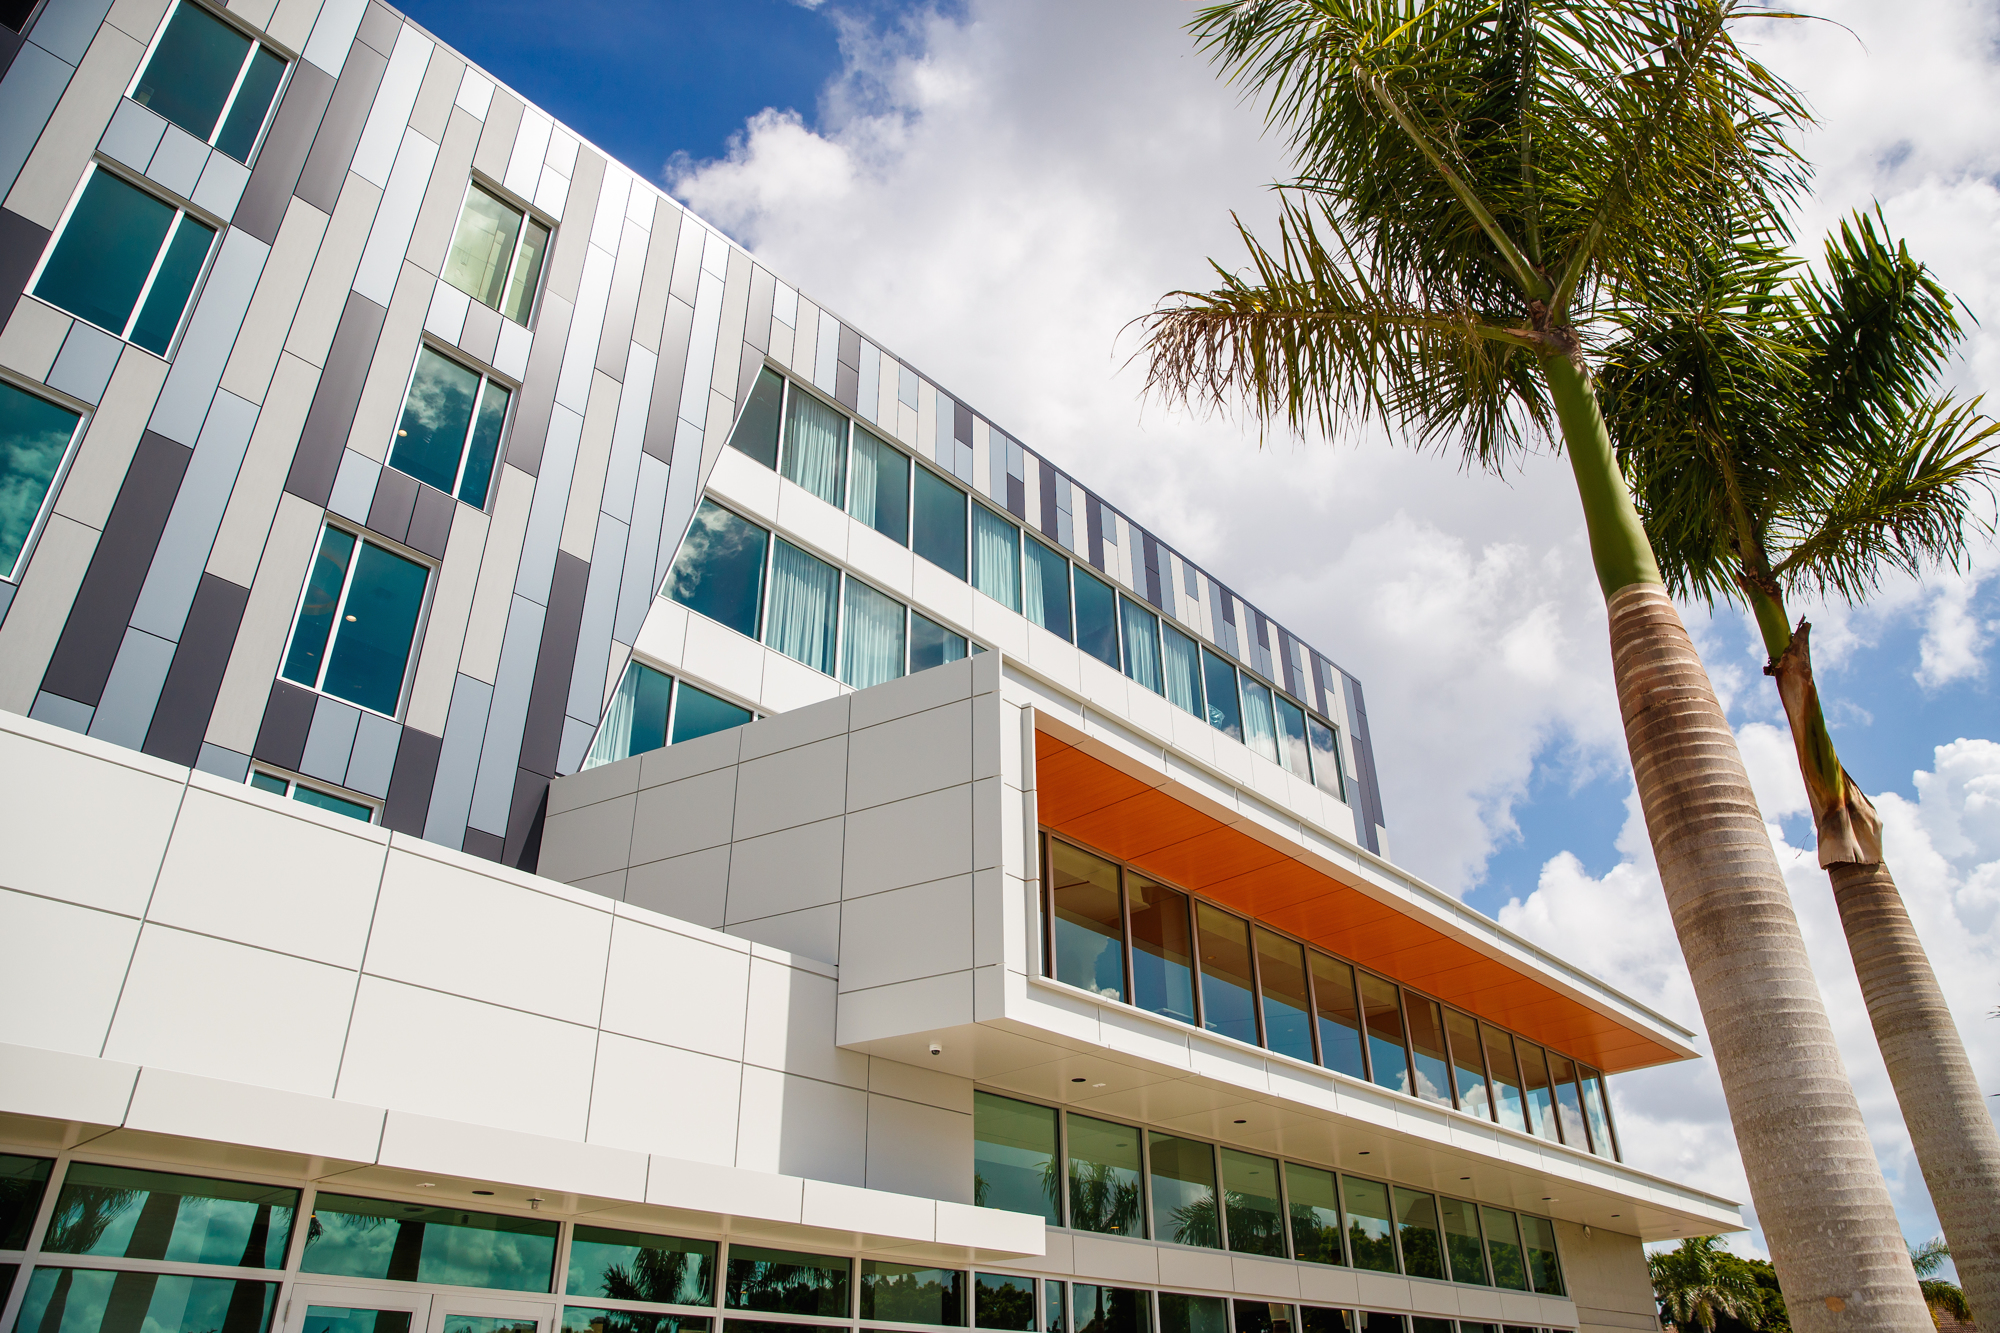 Courtesy, Casey Brooke/IMG Academy. The Legacy Hotel at IMG Academy has 150 guest rooms.